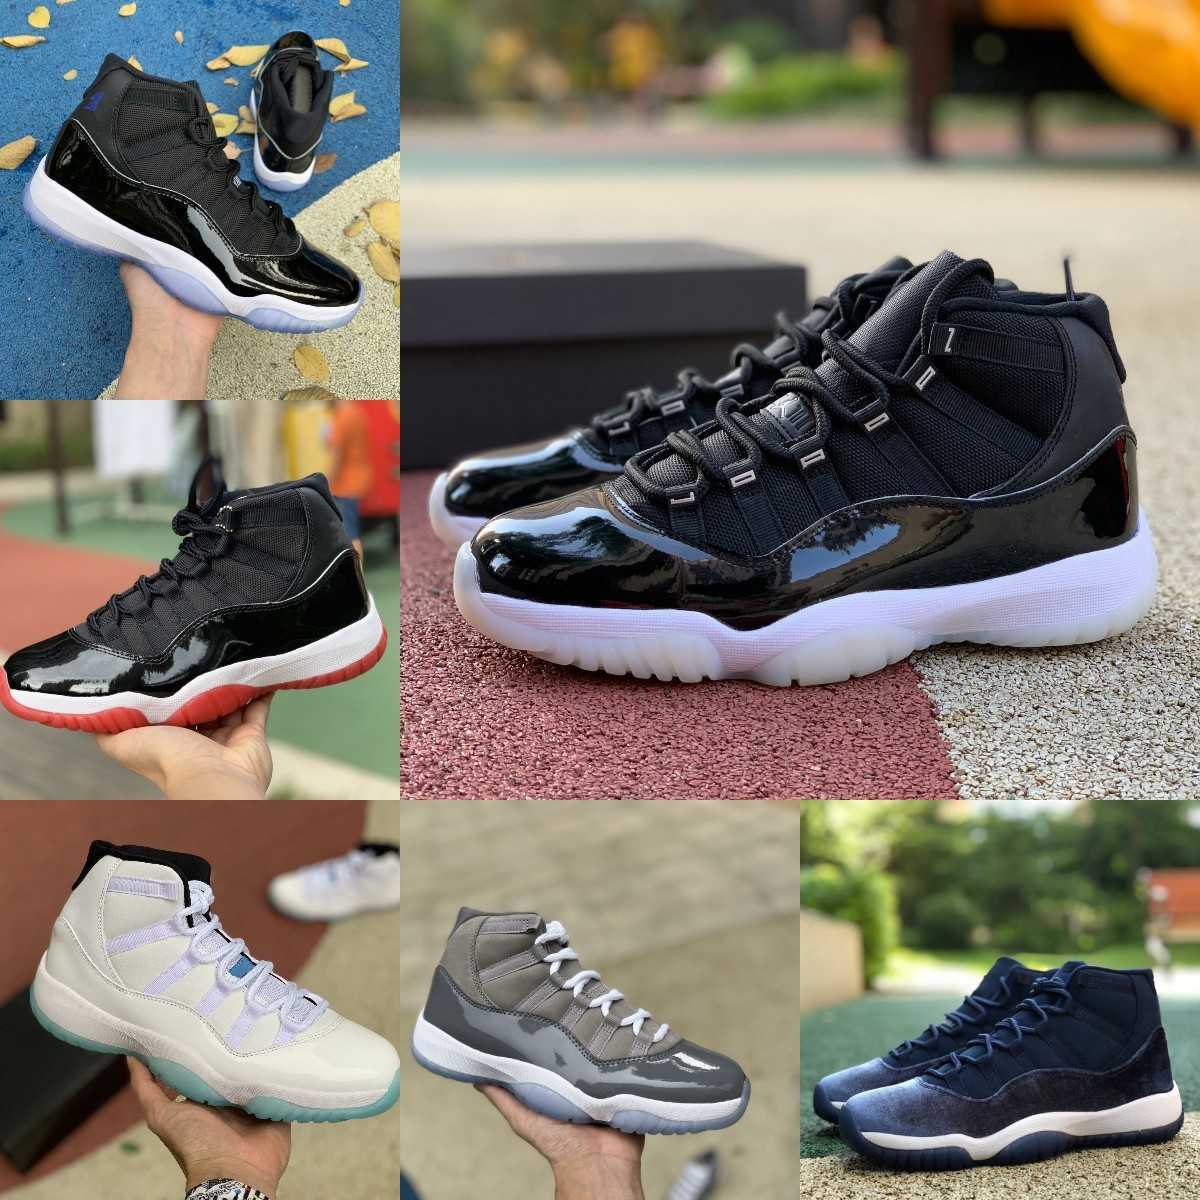 

Jumpman 11 Jumpman Jubilee 11 11s High Basketball Shoes COOL GREY Legend Blue Midnight Navy Playoffs Bred Space Jam Gamma Blue Easter Concord 45 Low, M3016